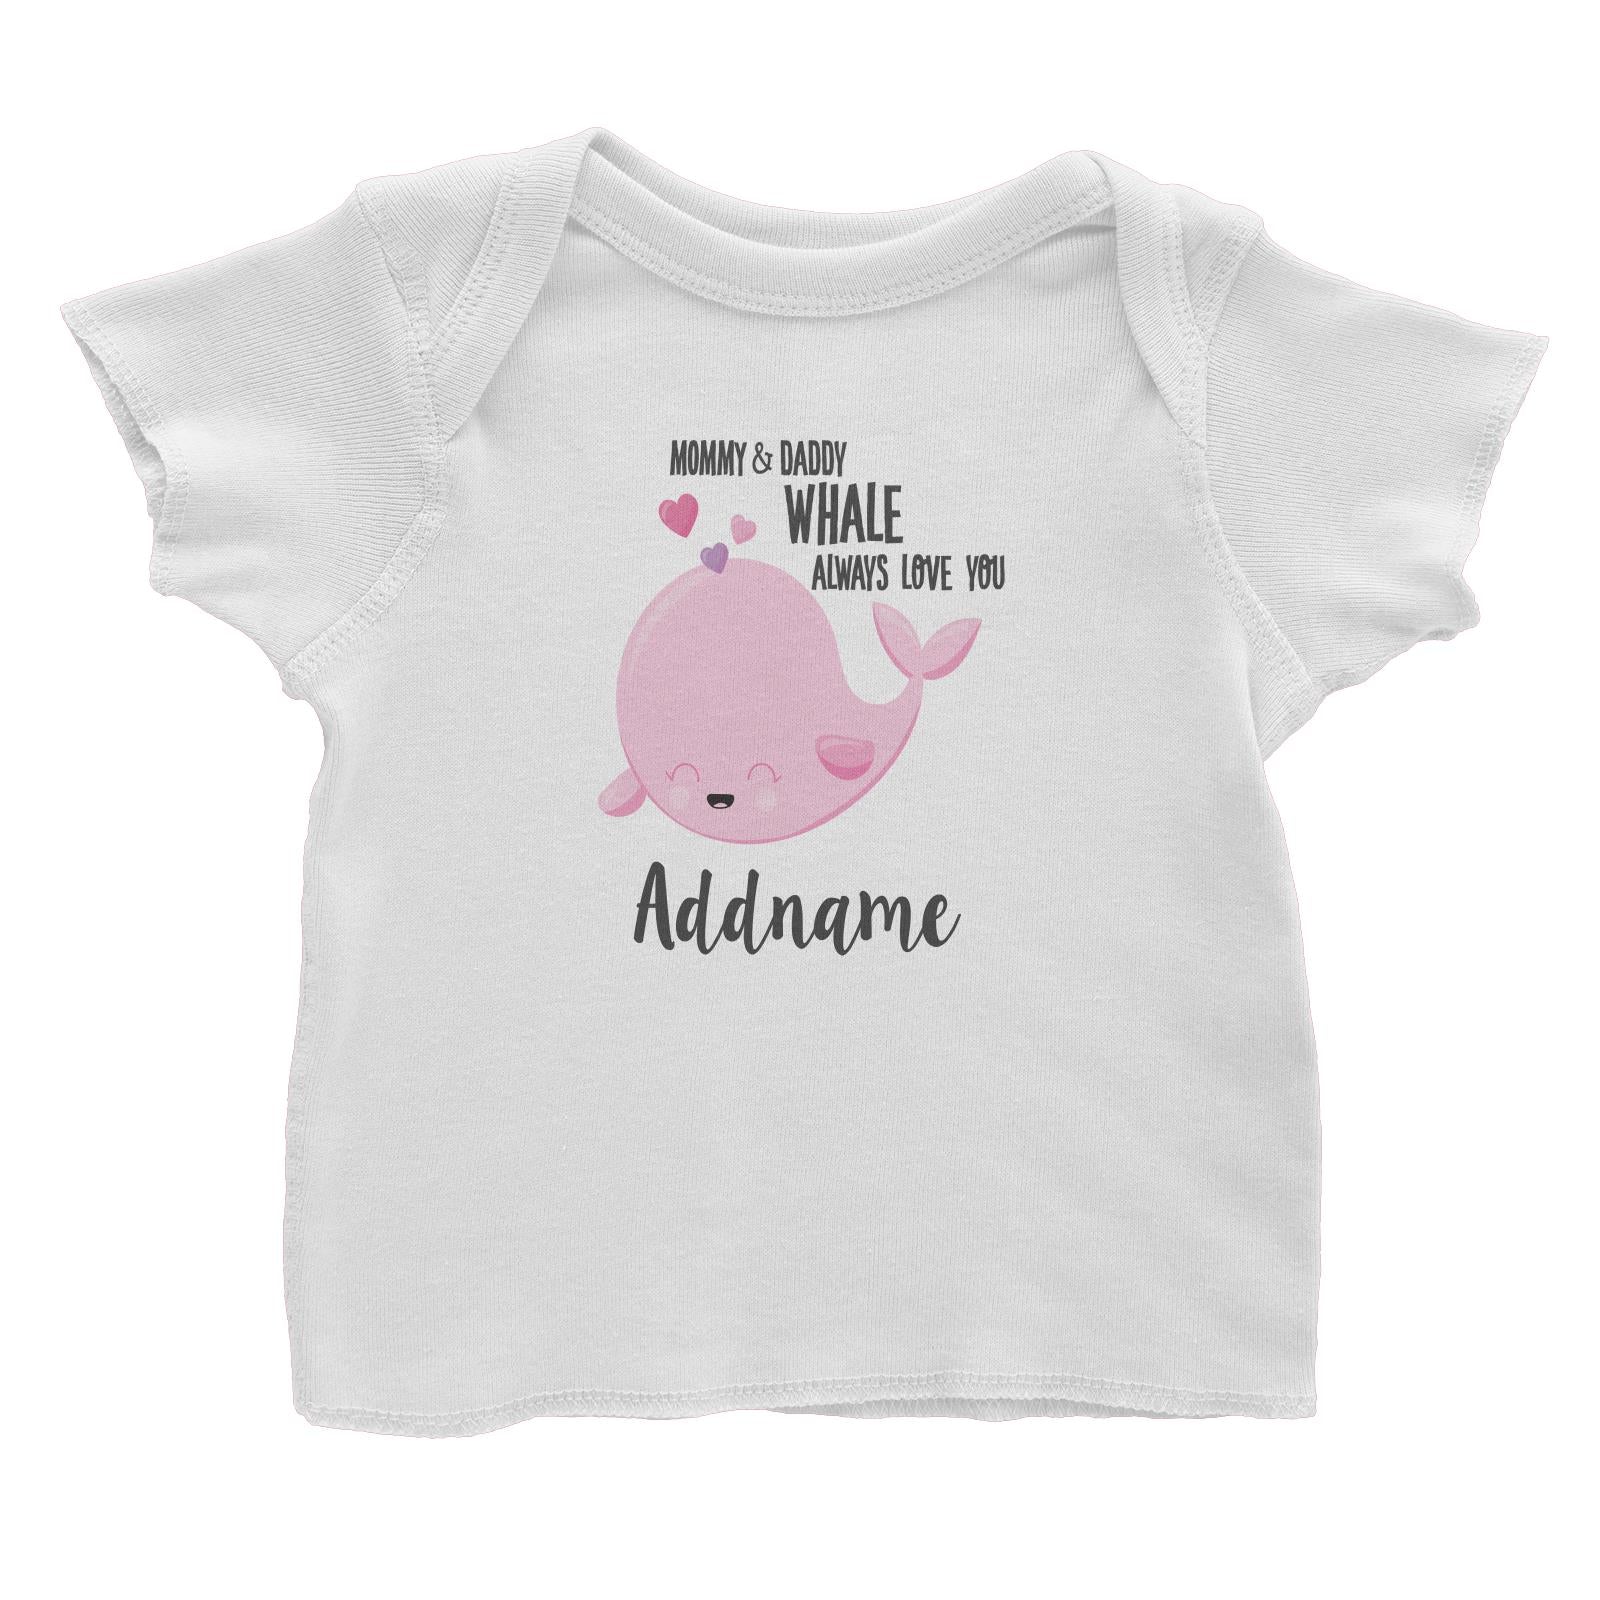 Cute Sea Animals Mommy & Daddy Whale Always Love You Addname Baby T-Shirt